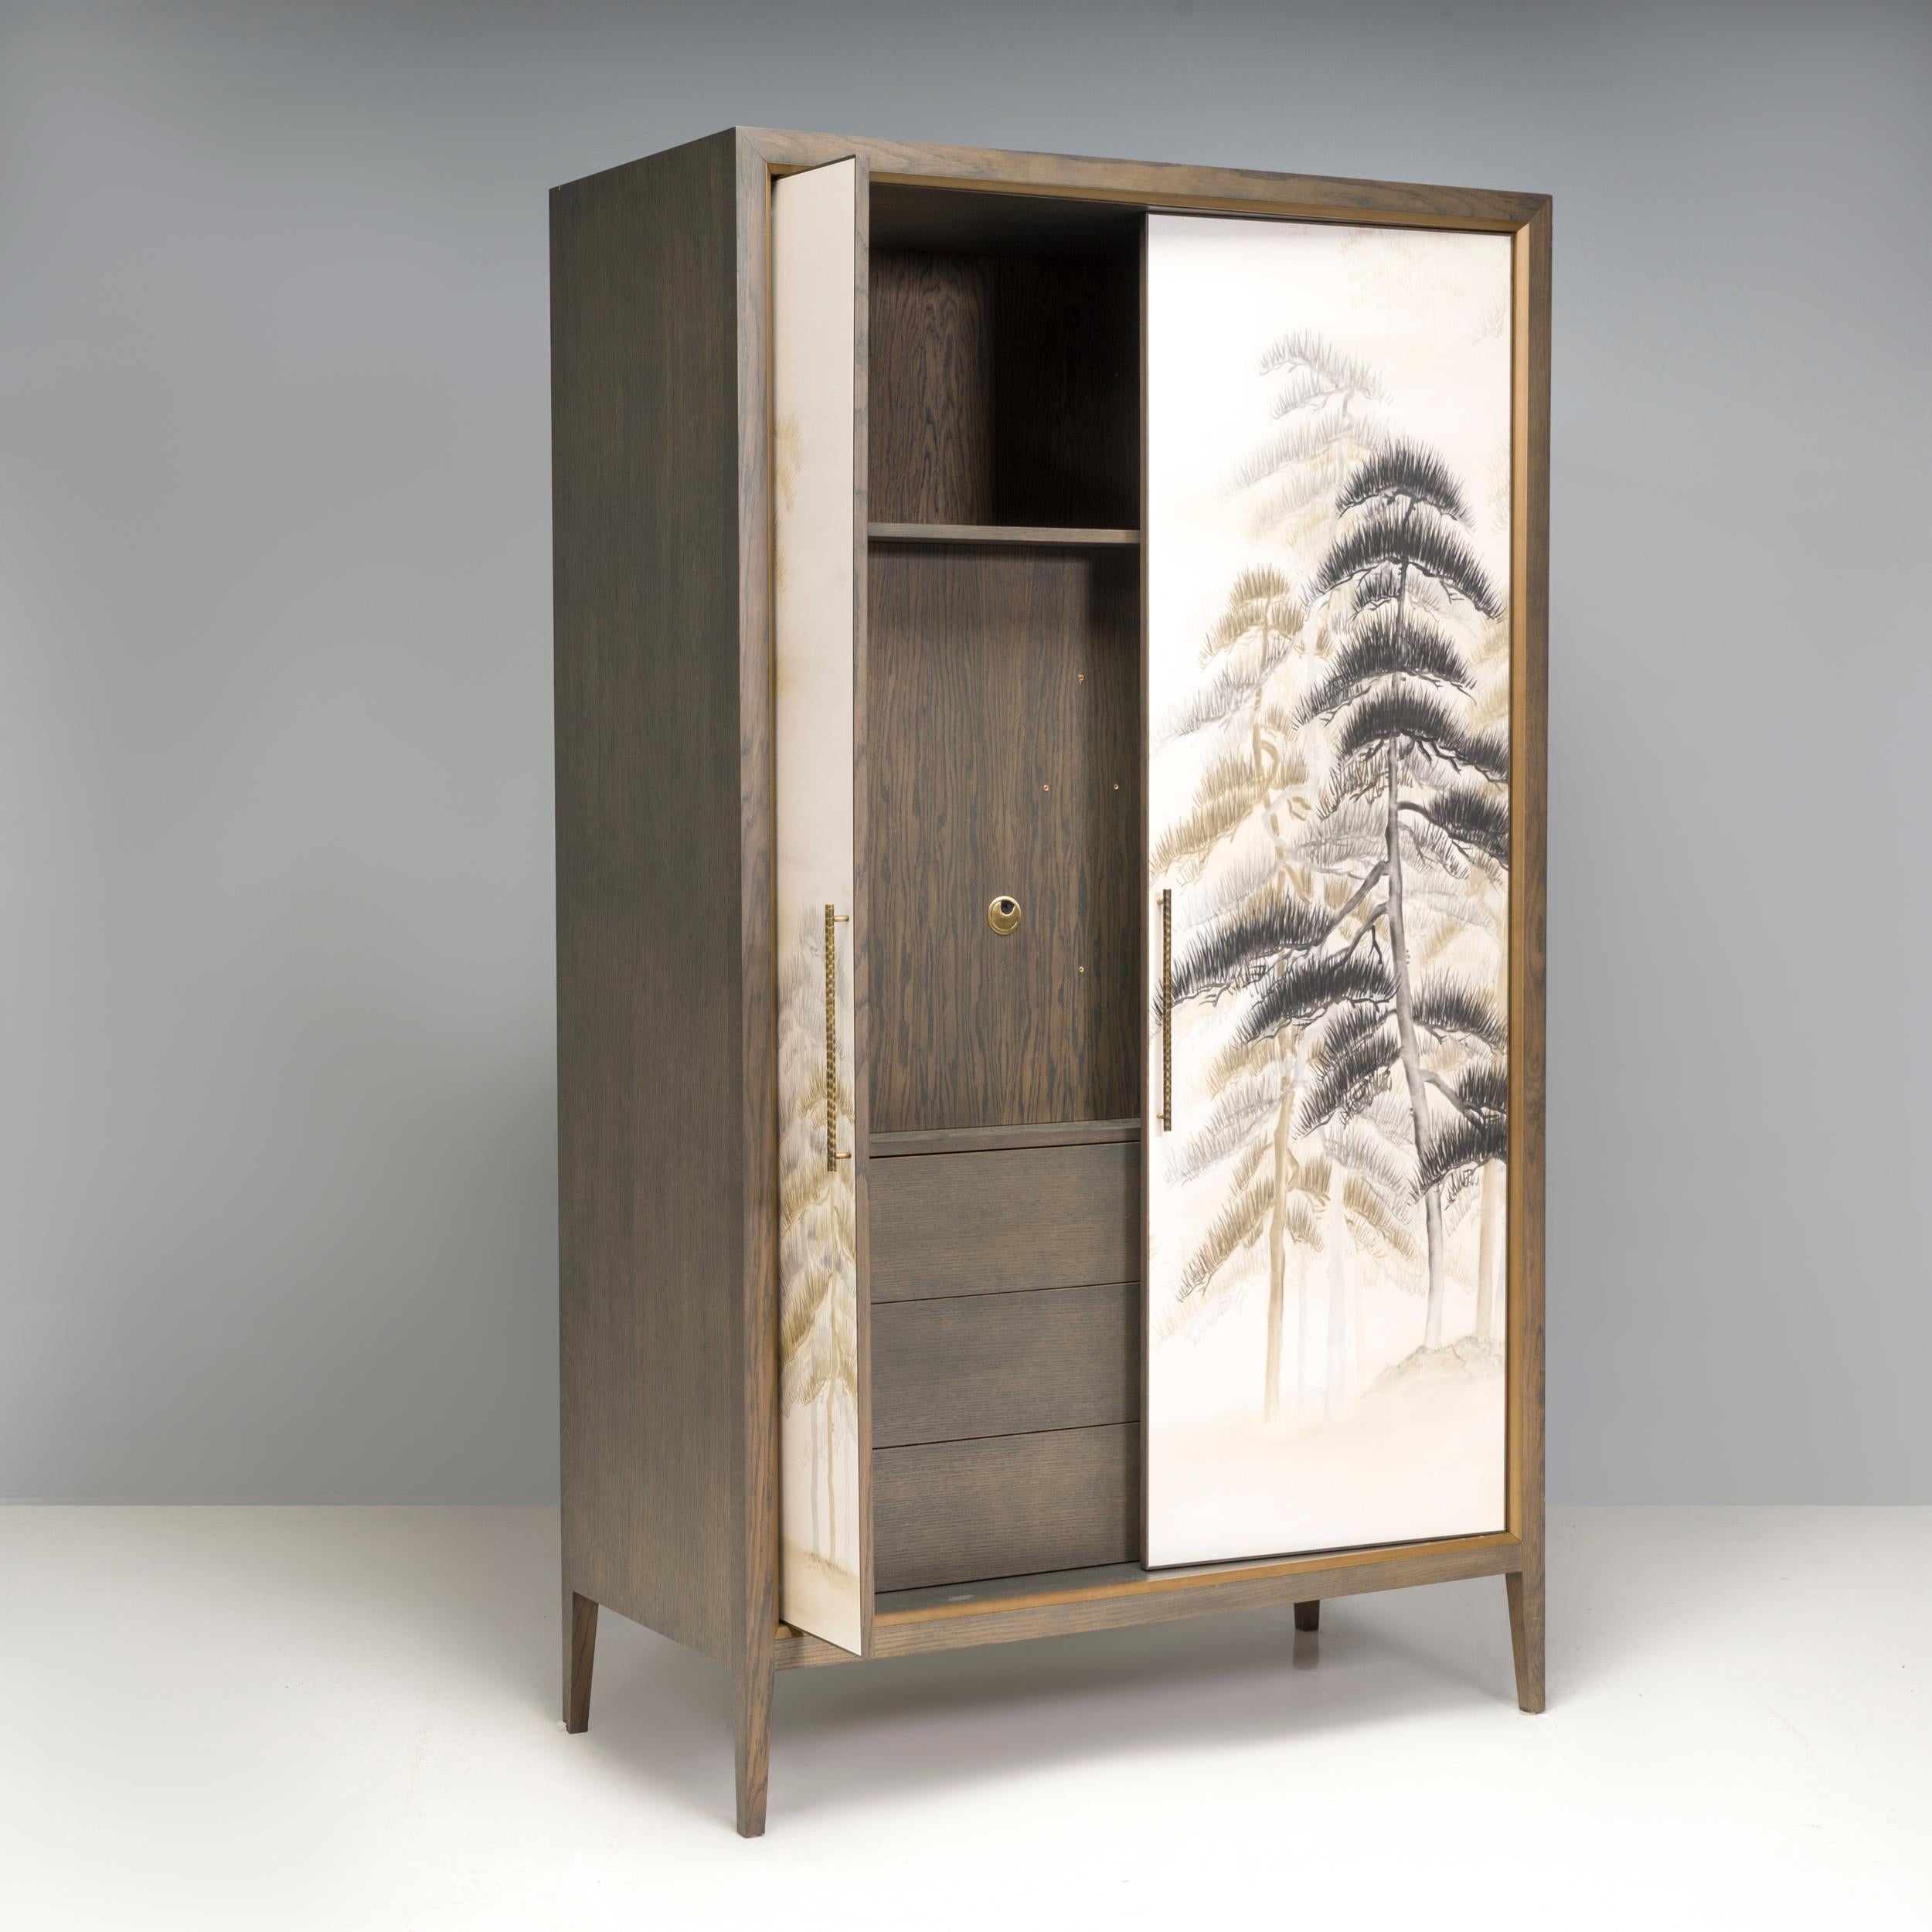 An intriguing cabinet, crafted in wood with solid brass handles. There is brass detailing on the edges framing the dark wood.

A special technique of hand printed silk on its doors featuring Chinoiserie style landscape.  The softness and sensibility